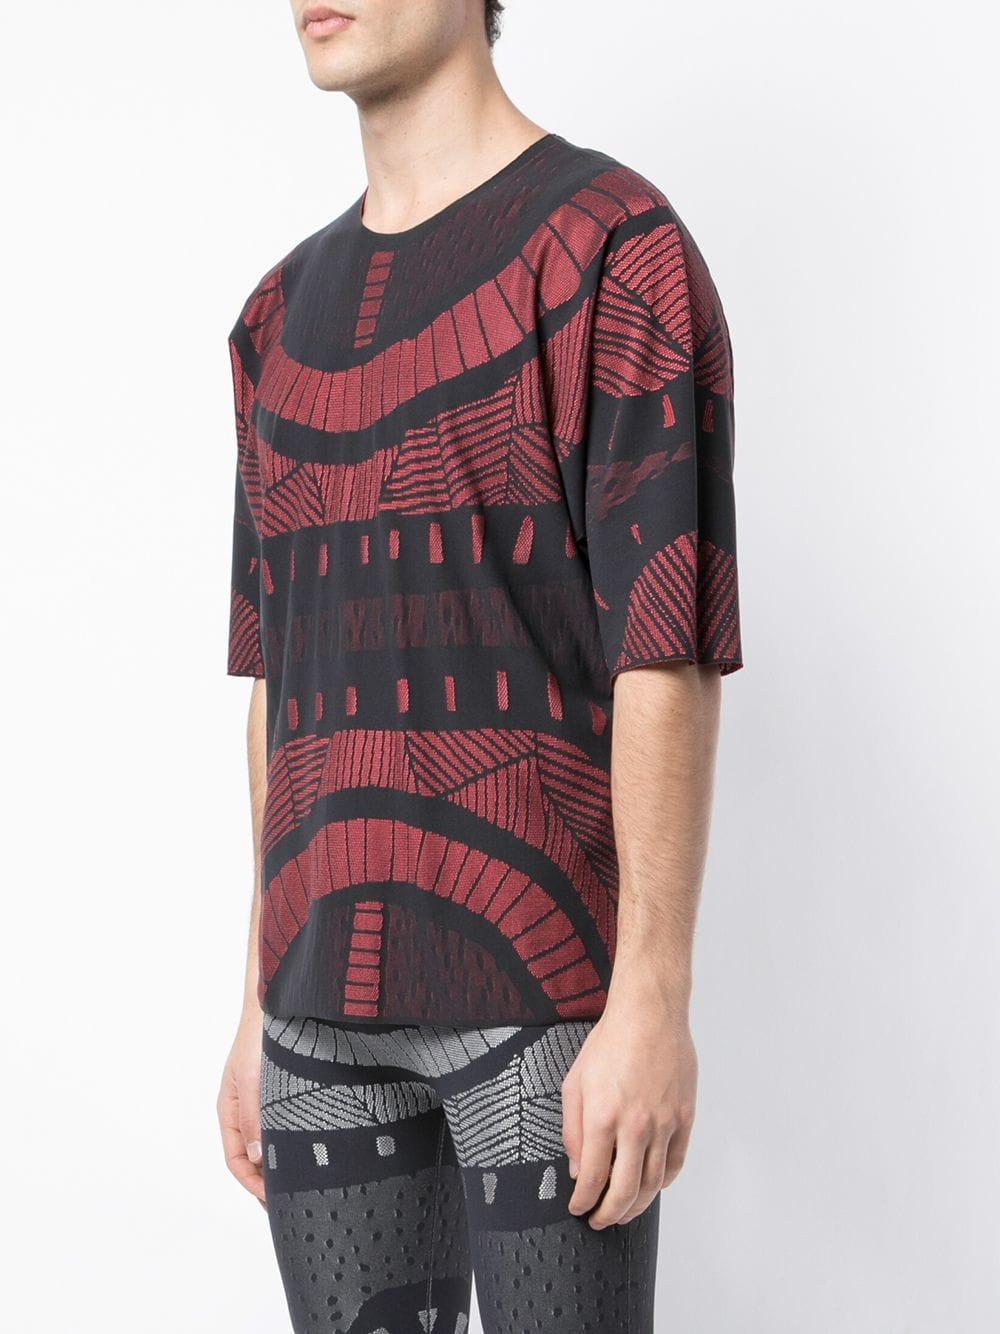 Homme Plissé Issey Miyake A-poc Under T-shirt in Black for Men - Lyst